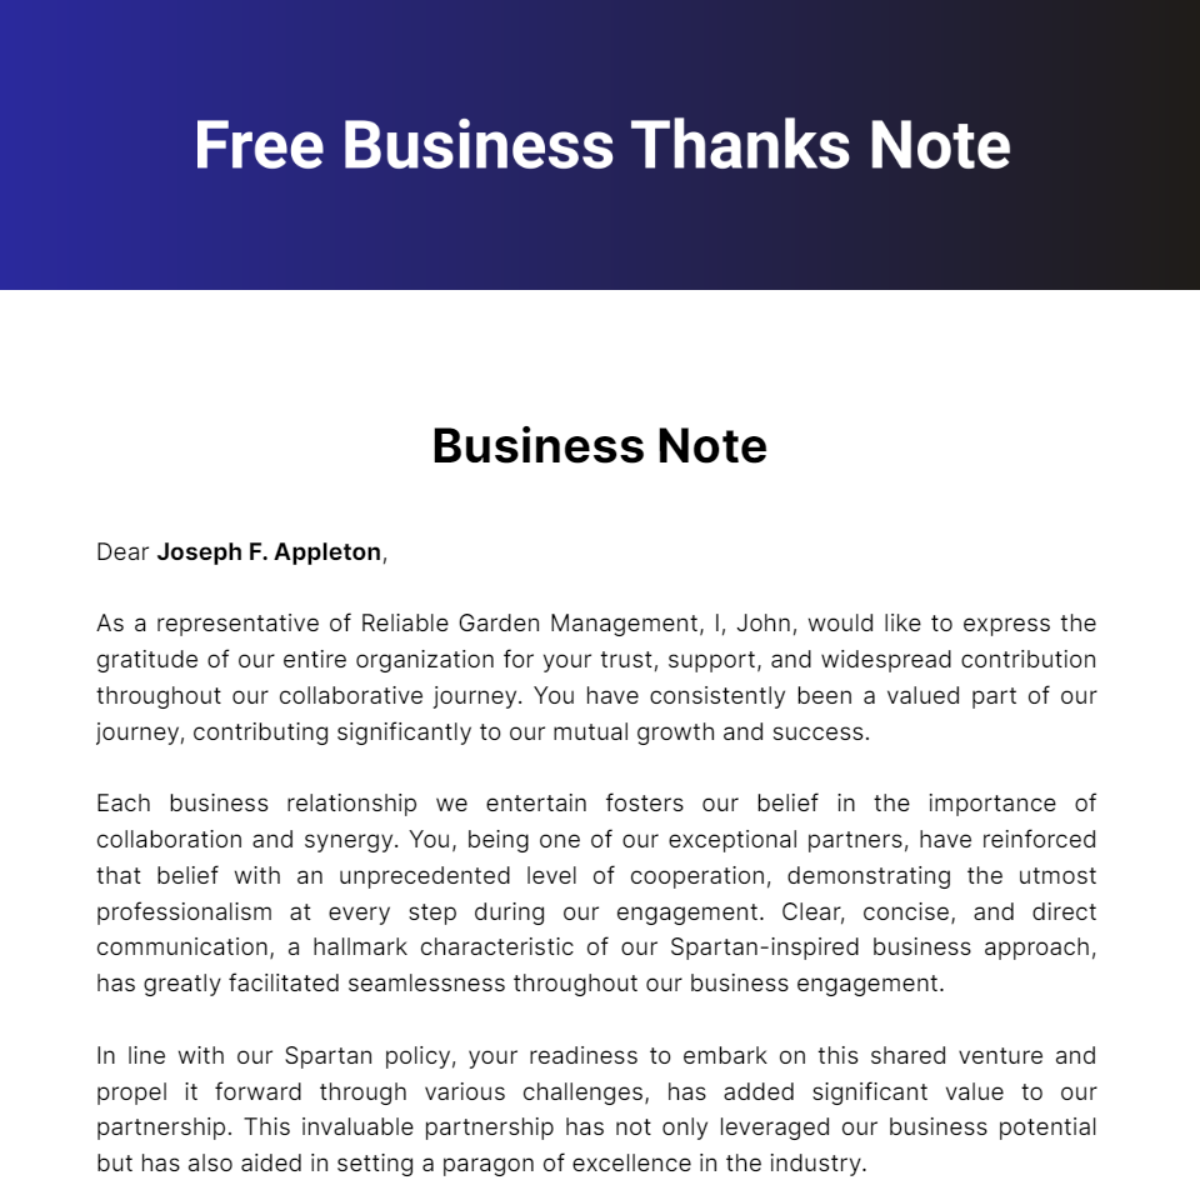 Free Business Thanks Note Template